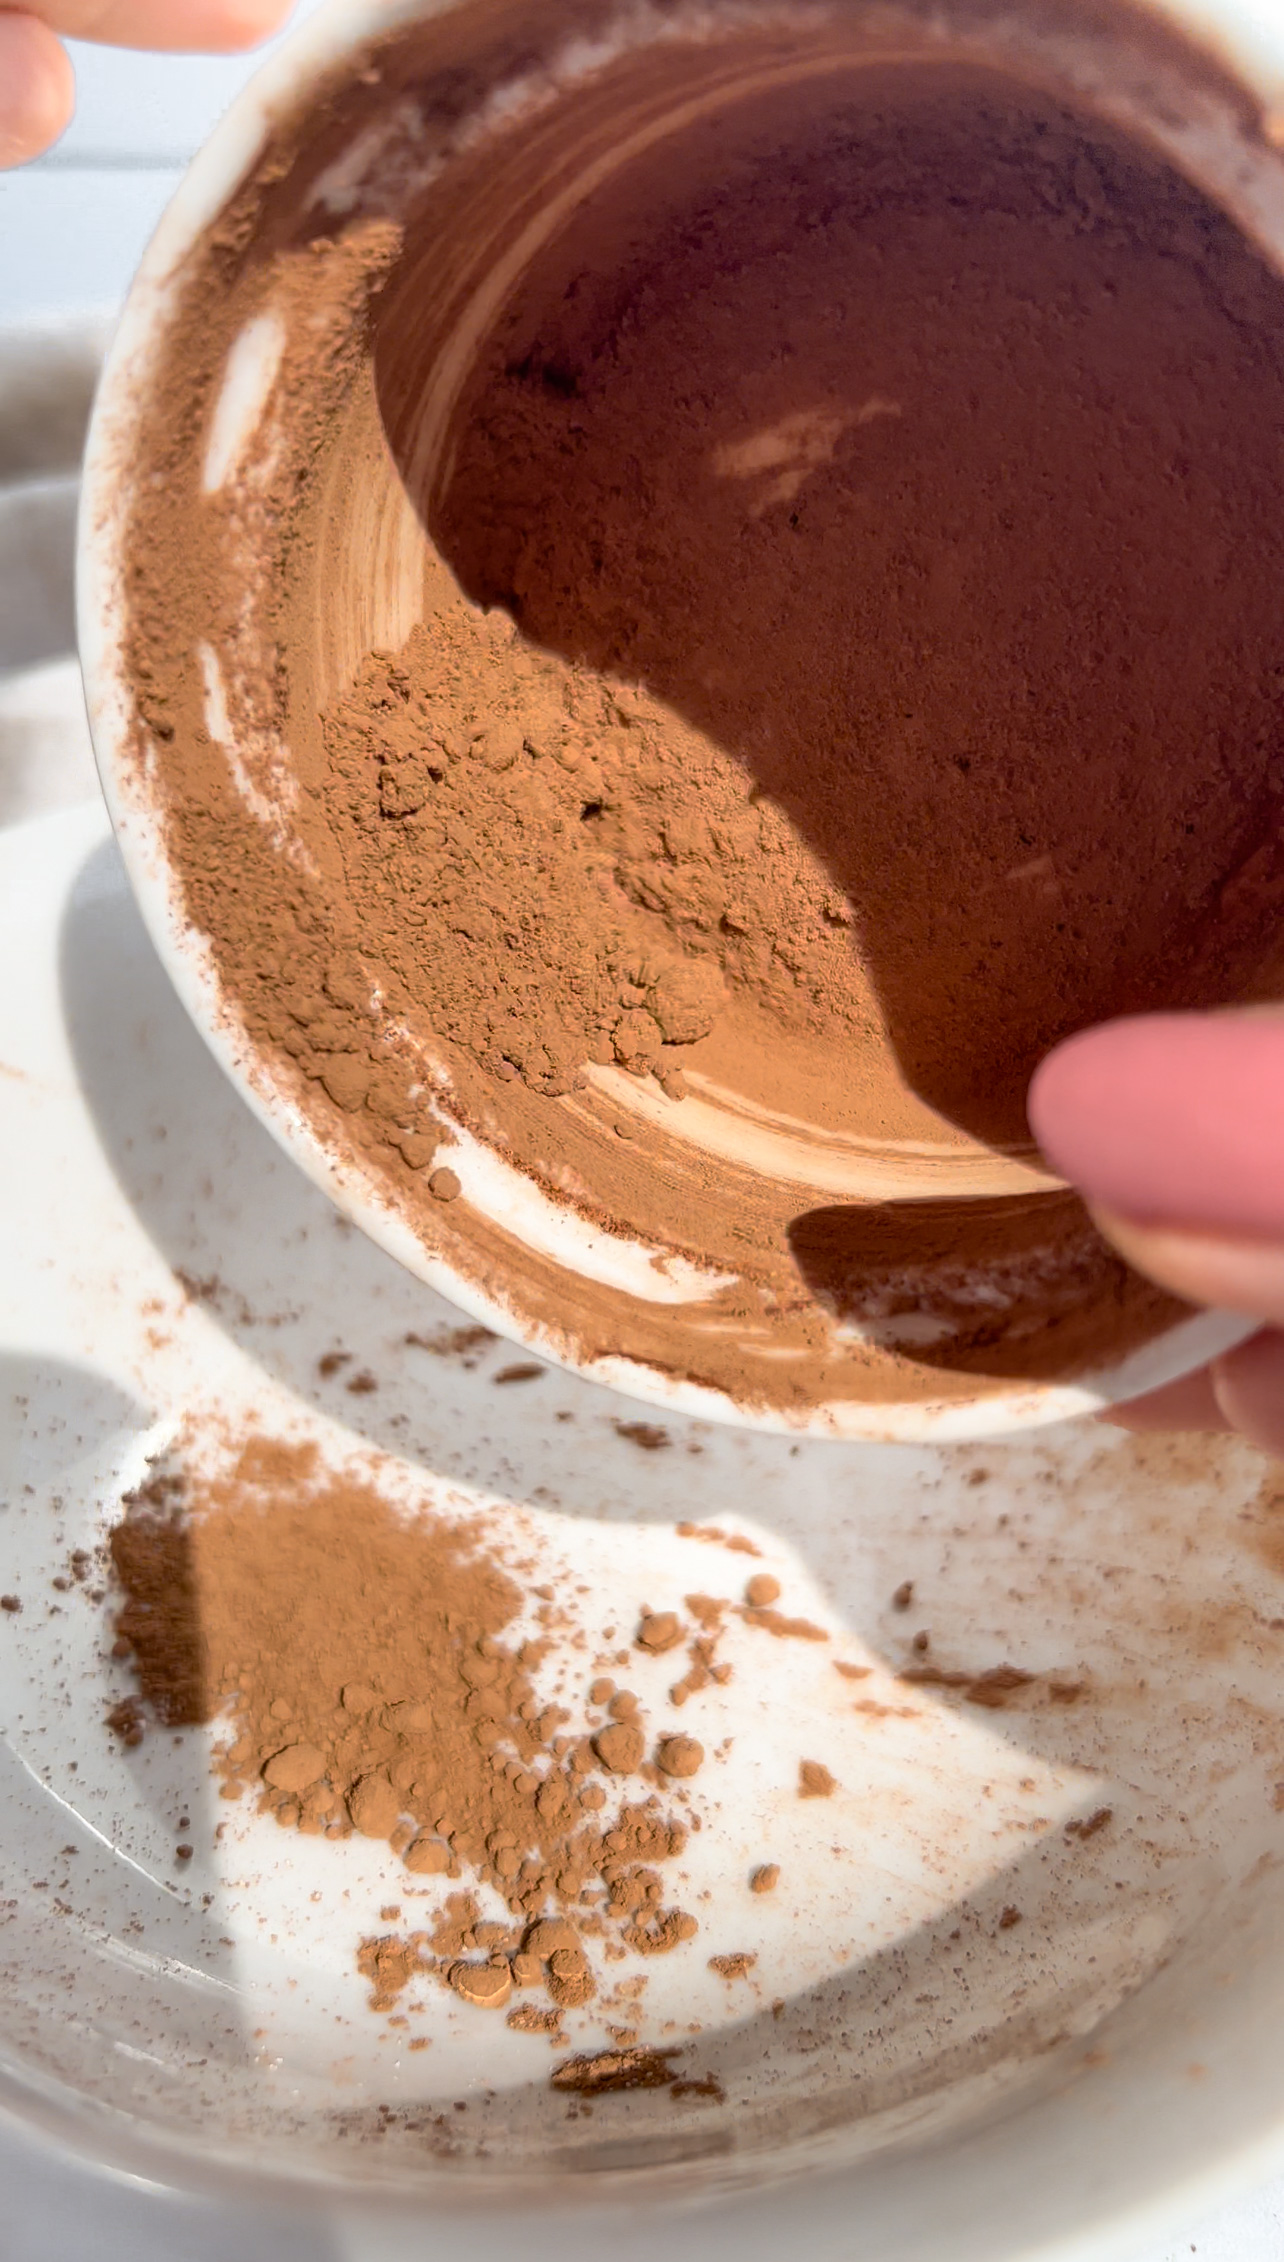 dusting cacao on a bowl